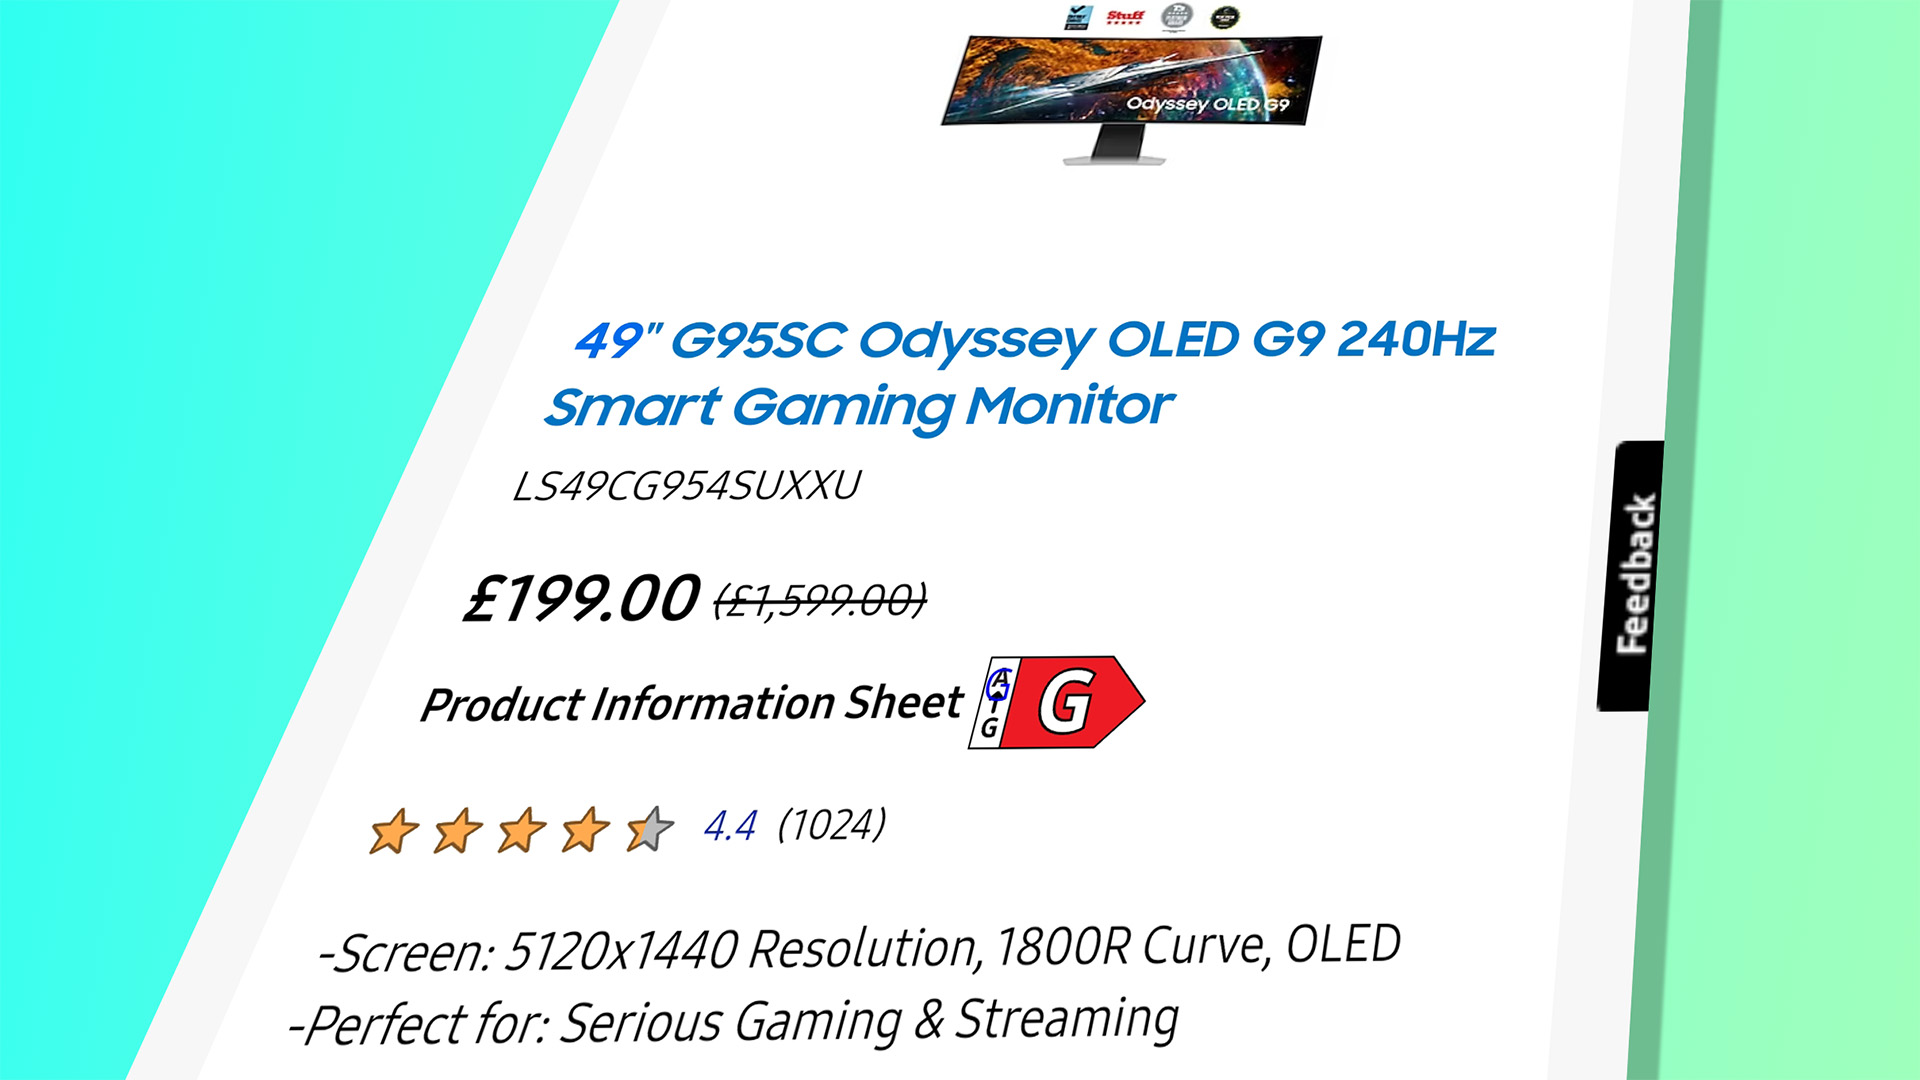  Samsung was either feeling generous or someone messed up big time when it temporarily slashed £1,400 off a 49-inch 240 Hz OLED gaming monitor 